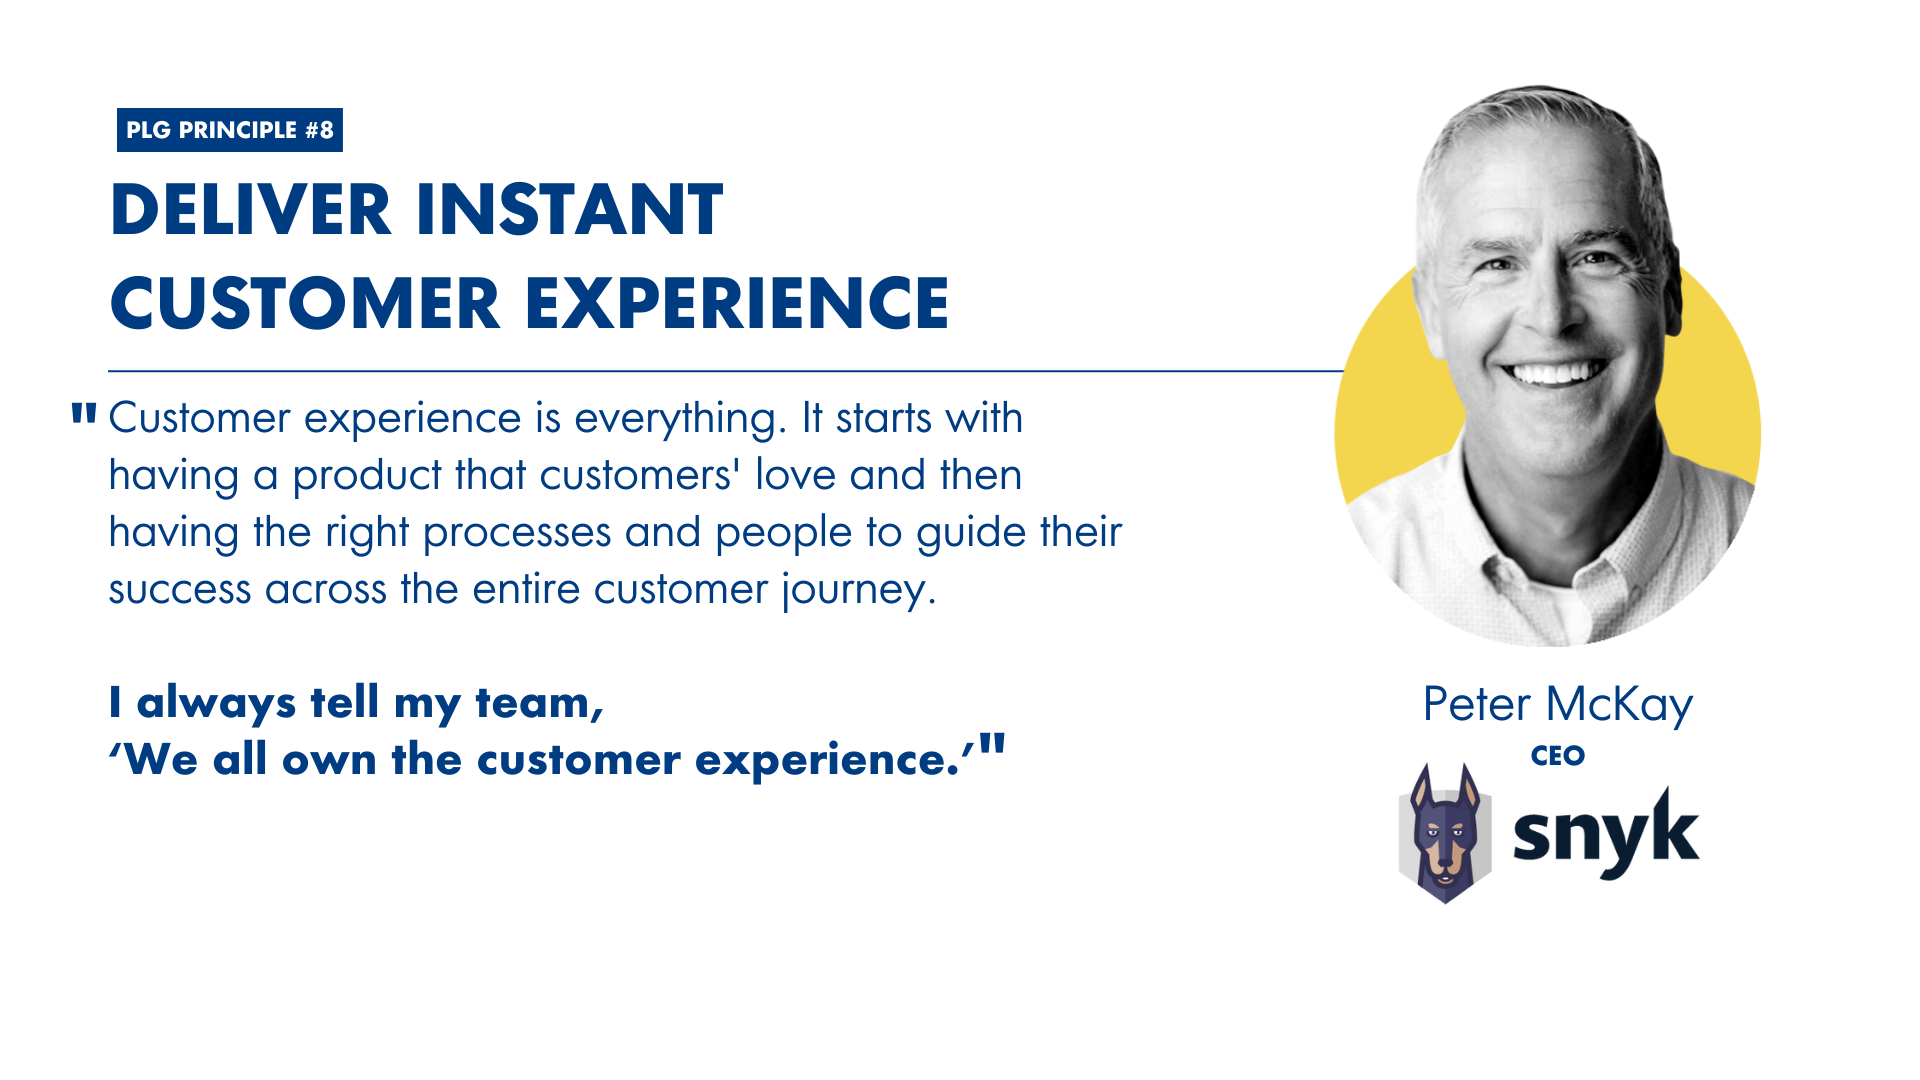 Snyk CEO Peter McKay Customer Experience Quote